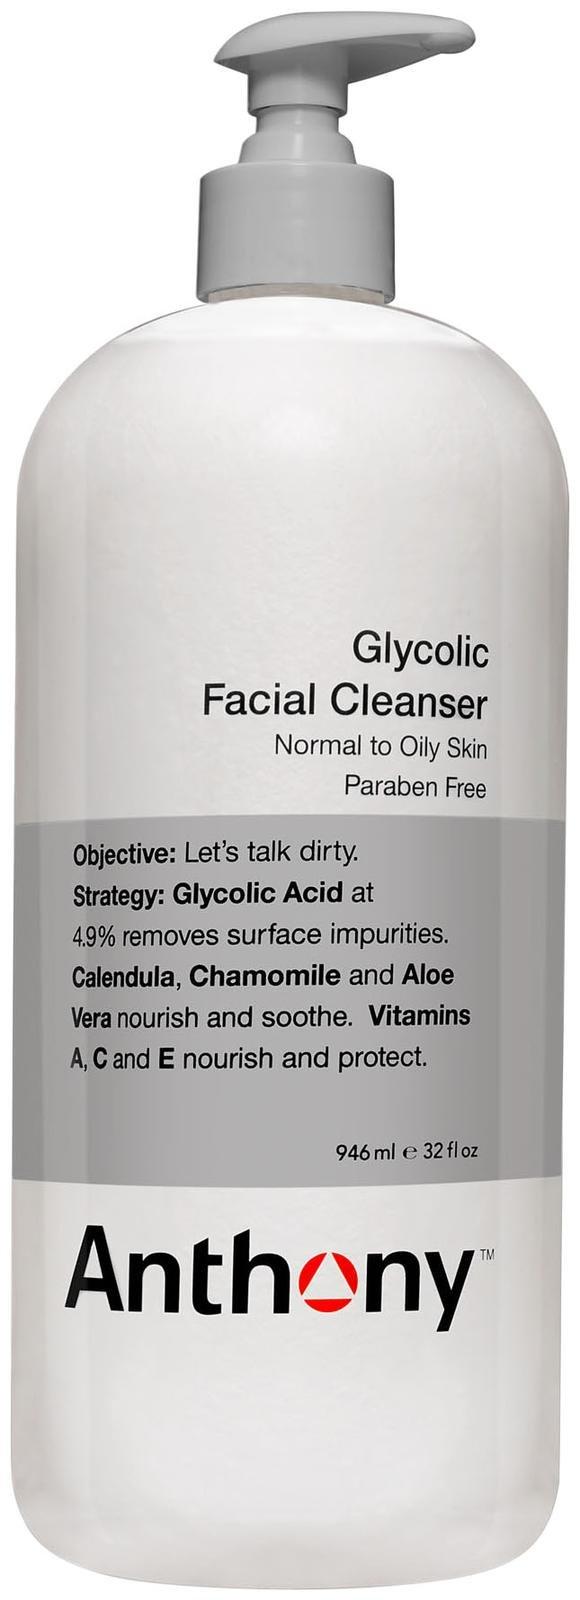 Anthony Glycolic Facial Cleanser Jumbo